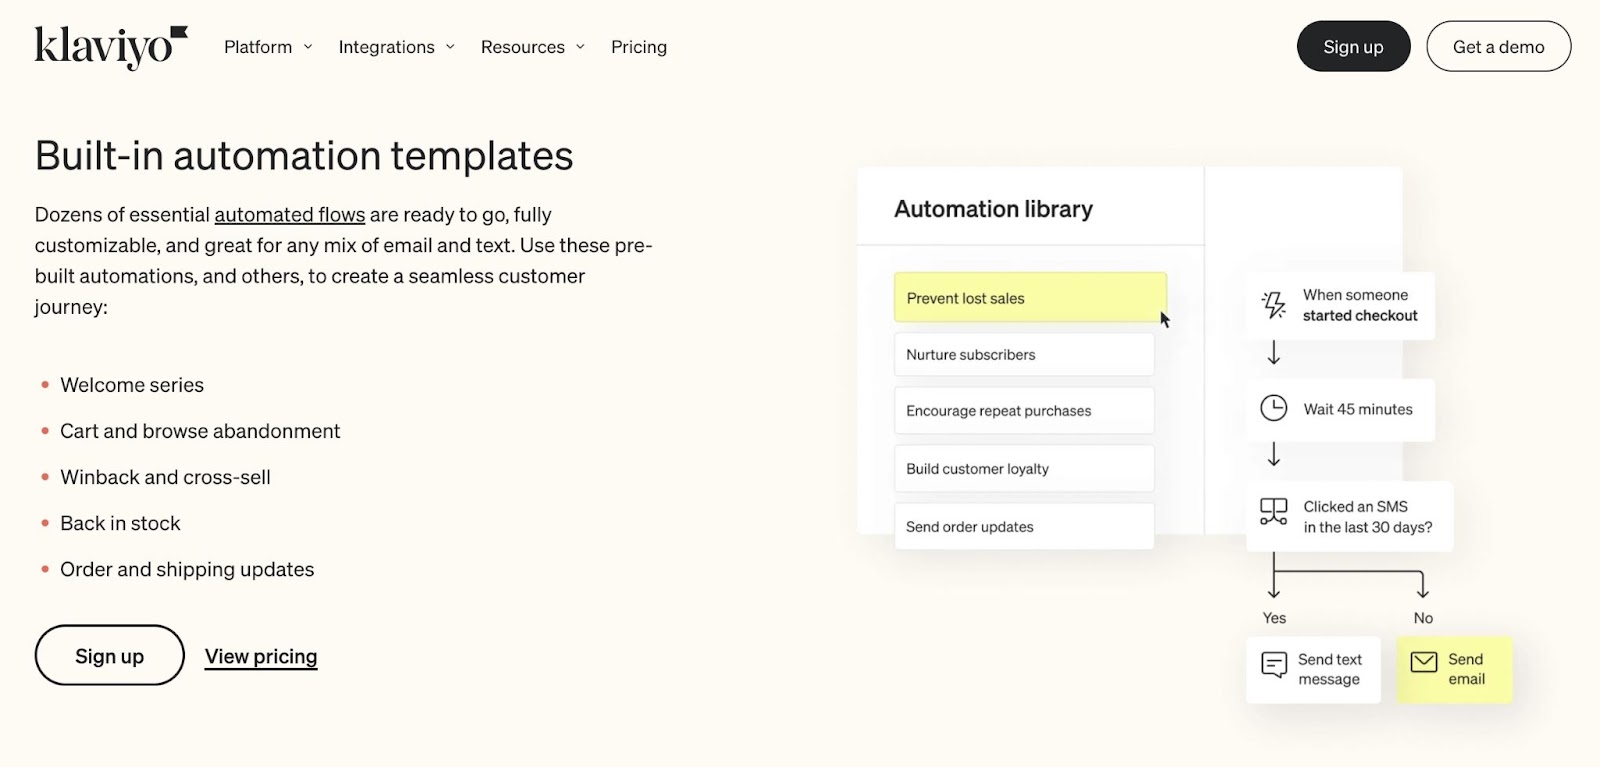 "Automation templates" section on the "Klaviyo" website showing a list of ready-to-use flows and a visual of how it works.